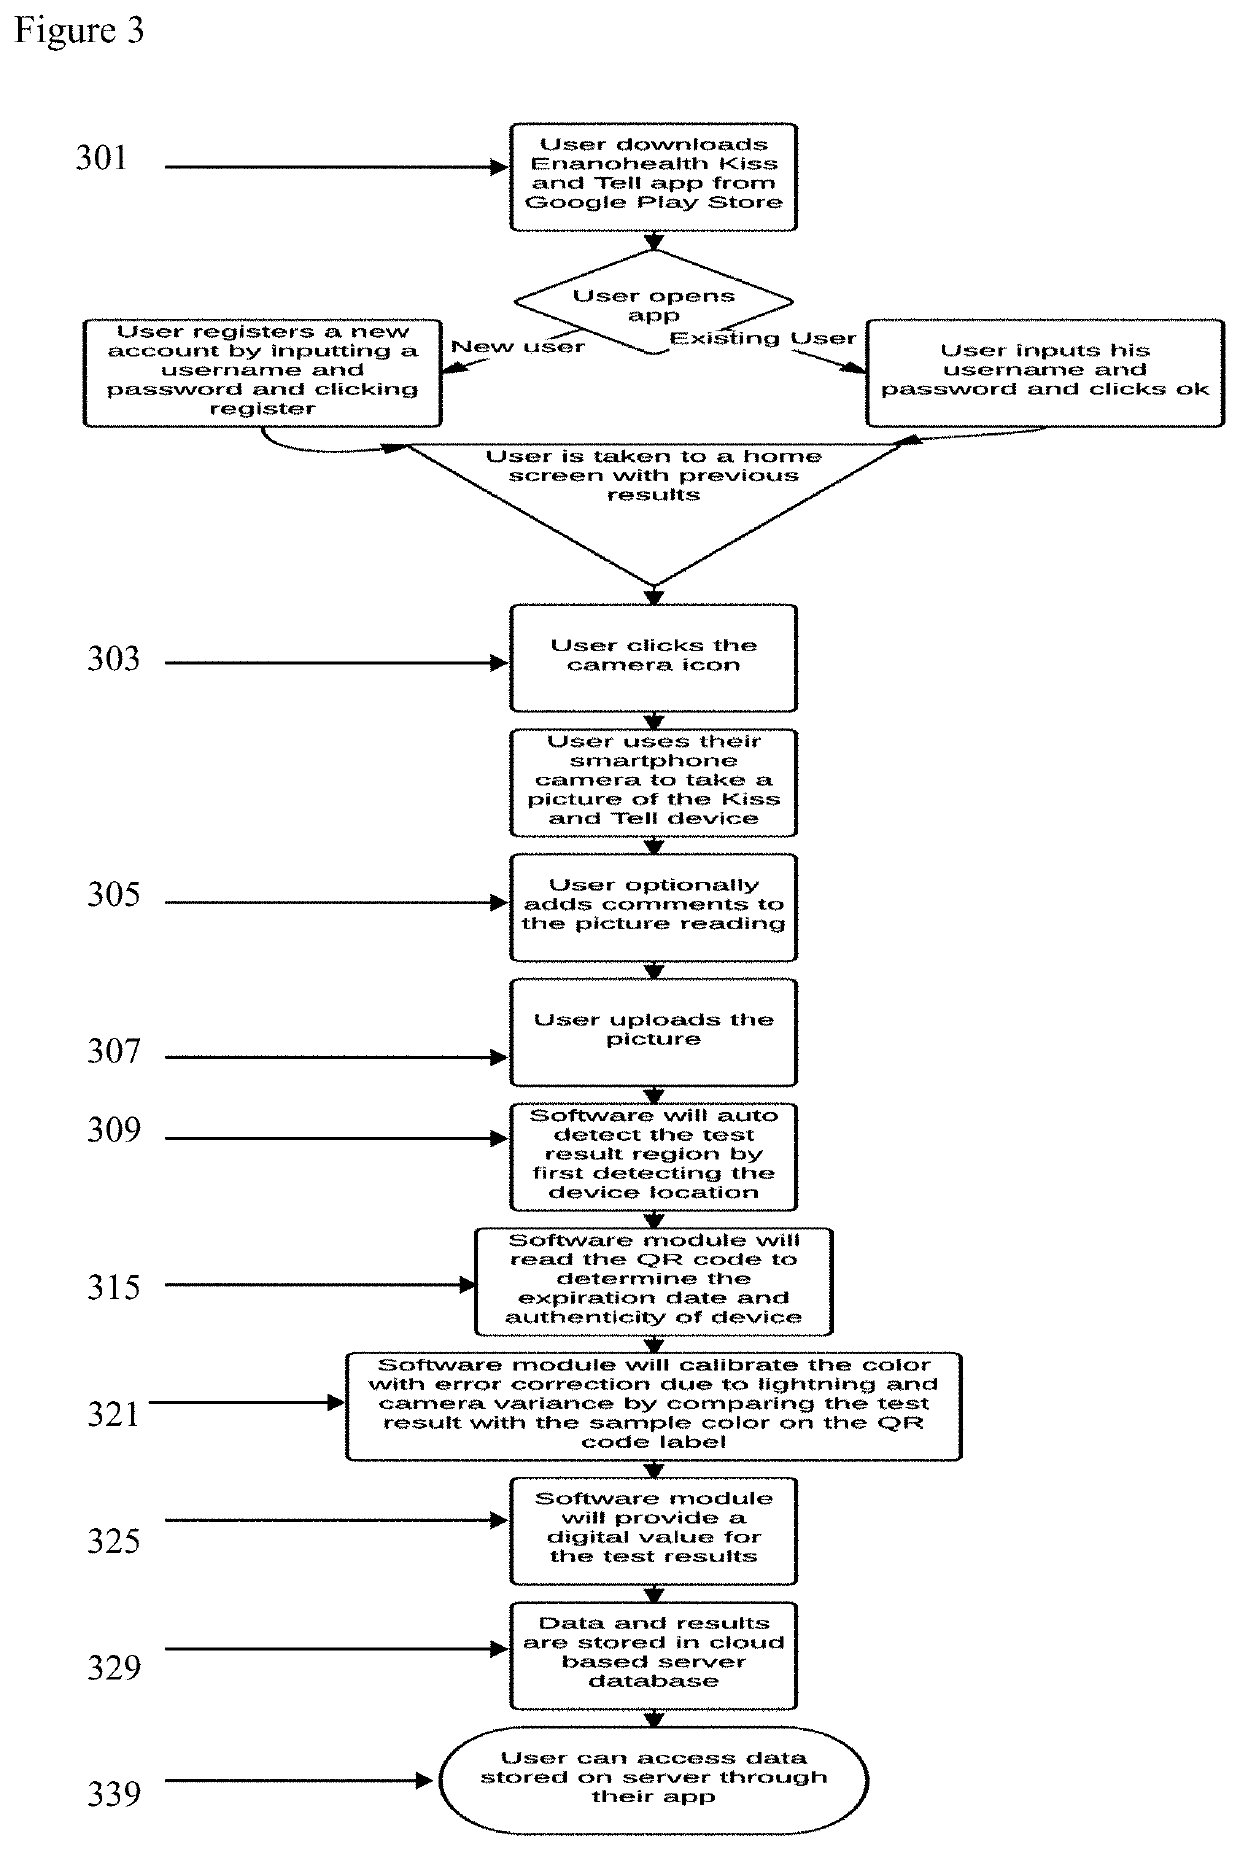 Public personalized mobile health sensing system, method and device